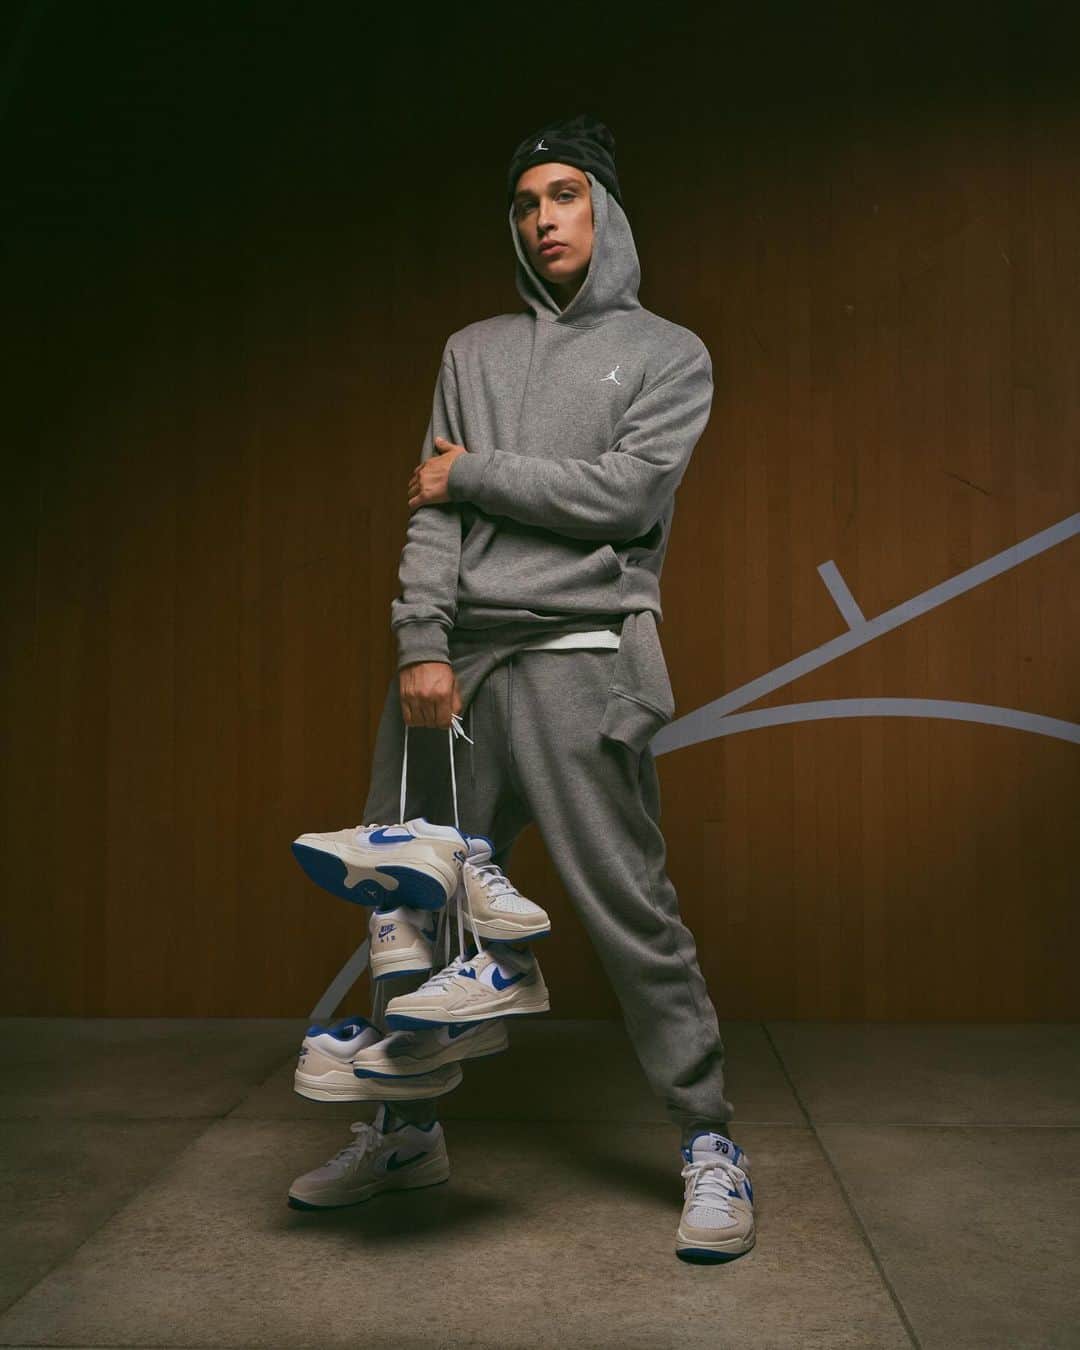 Jordanのインスタグラム：「Iconic style meets modern comfort.  The Stadium 90 brings nostalgic AJ1 and AJ5 elements into today’s era to create a new classic you can wear every day.  Tap to shop.」